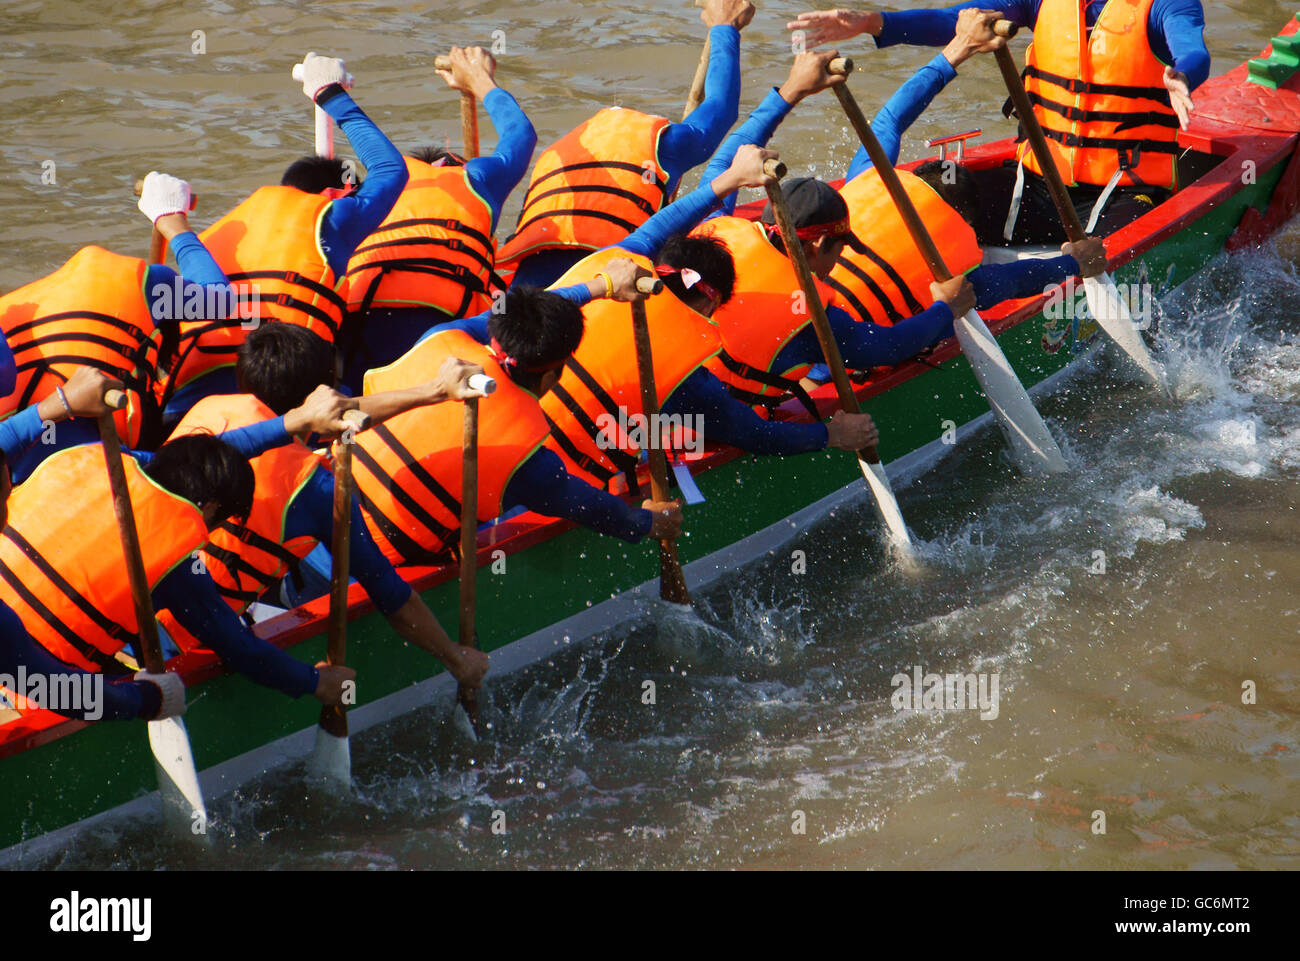 Teamwork of man, rowing dragon boat in racing, try to row with high speed and championship spirit, rhythm of paddle so dynamic Stock Photo